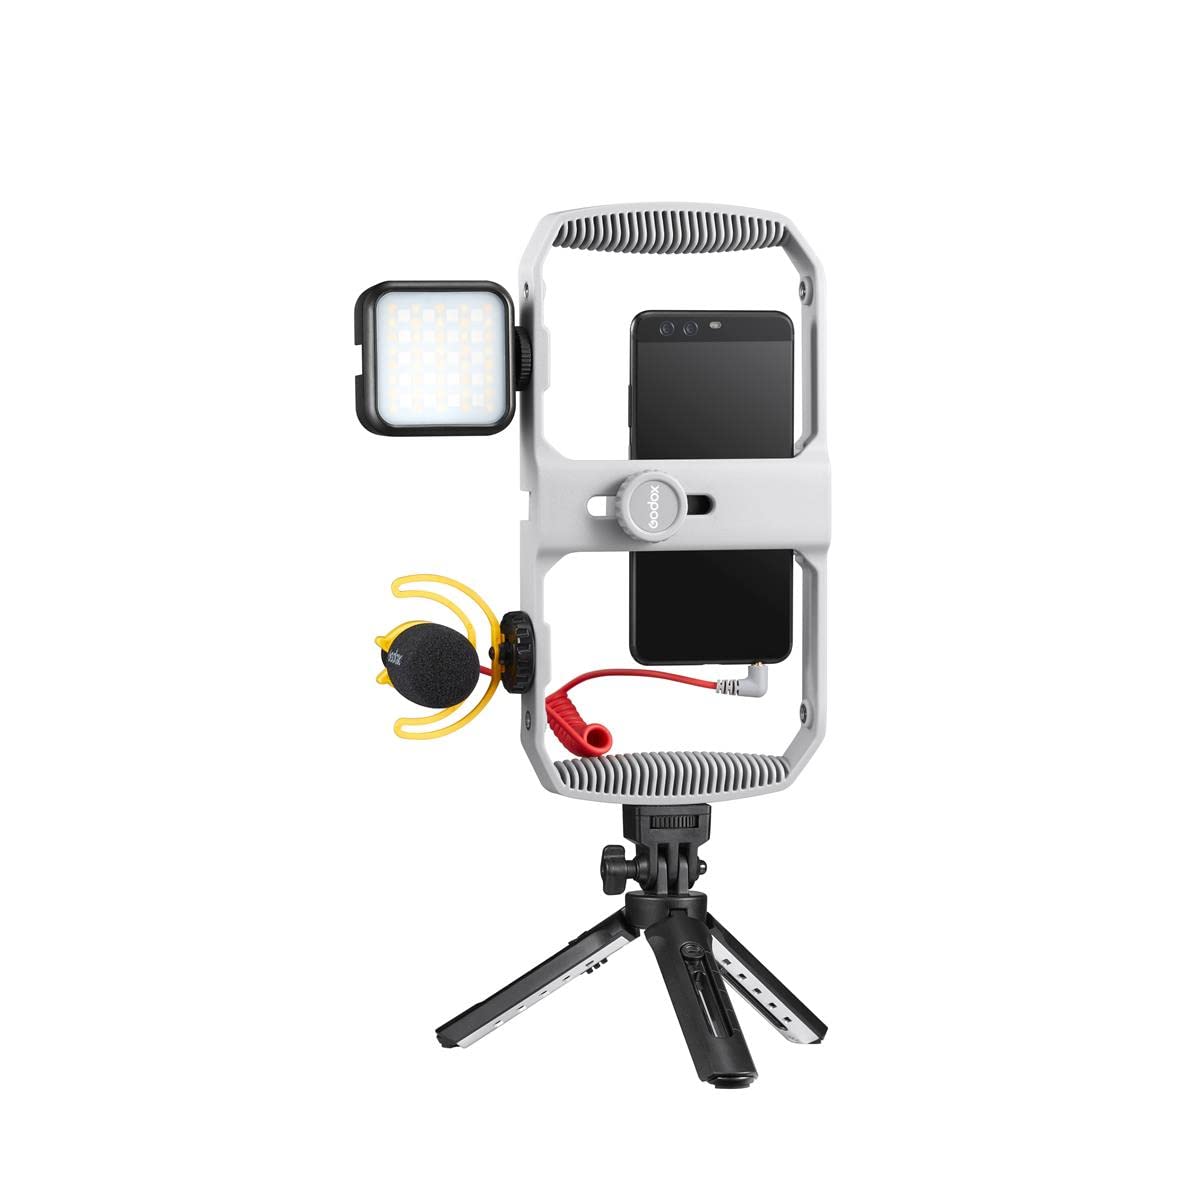 GODOX VK1-UC Vlogging Kit for Mobile Devices with USB Type-C Ports